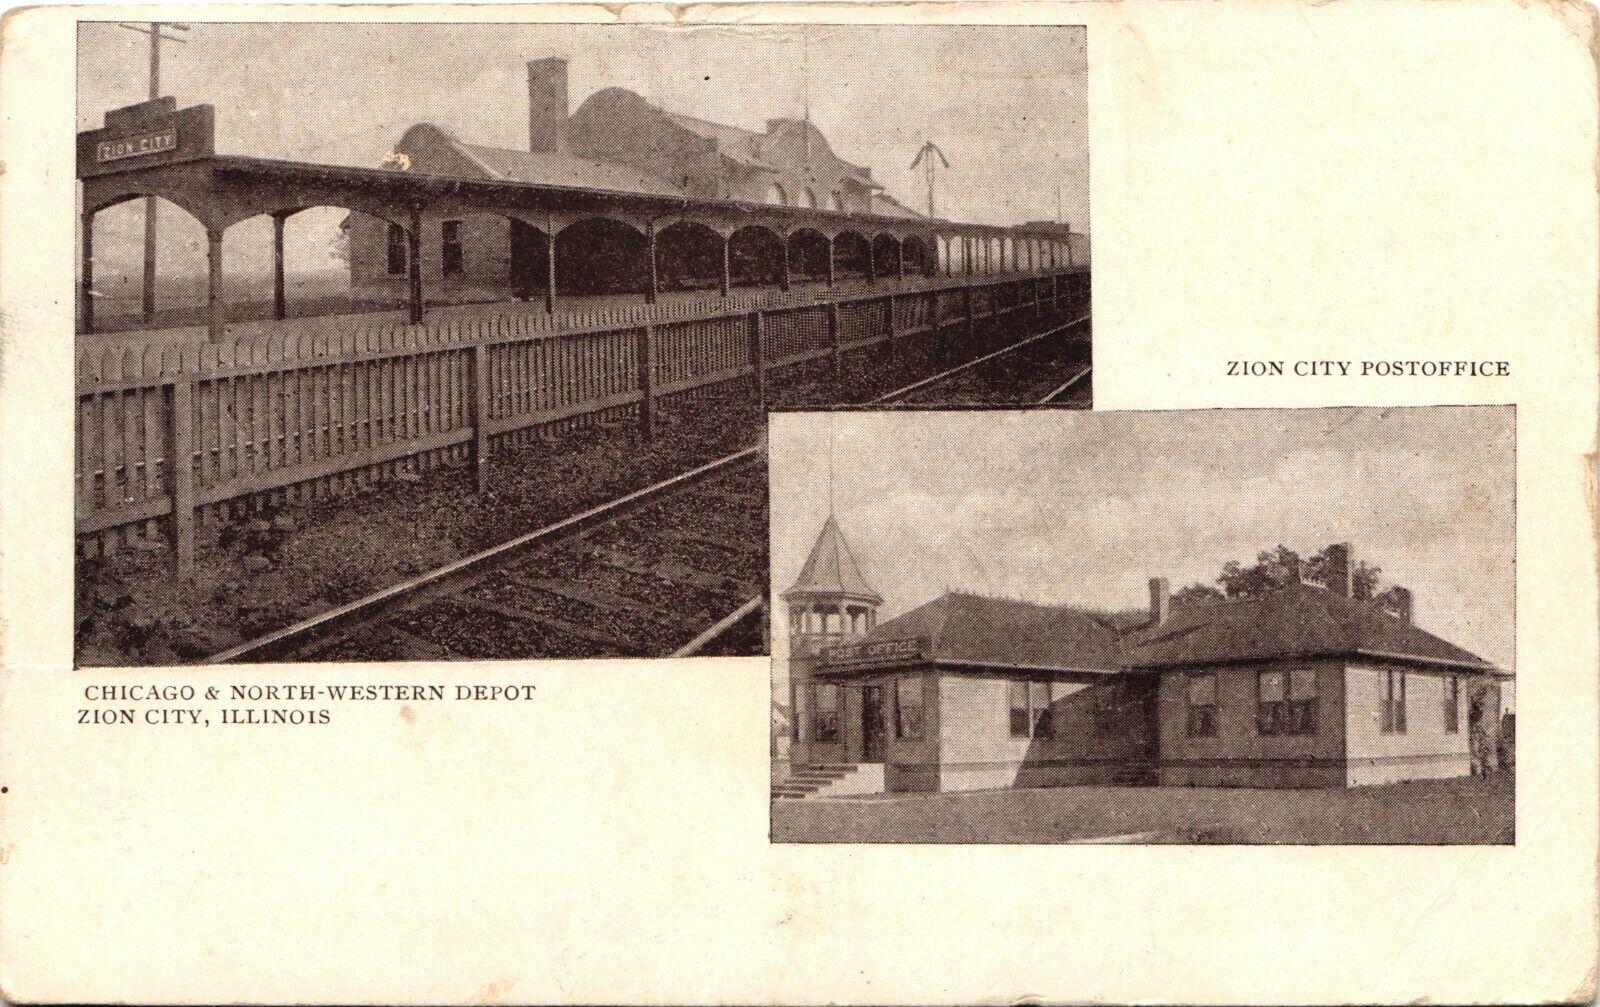 C&NW DEPOT, POST OFFICE picture postcard ZION CITY ILLINOIS IL train station